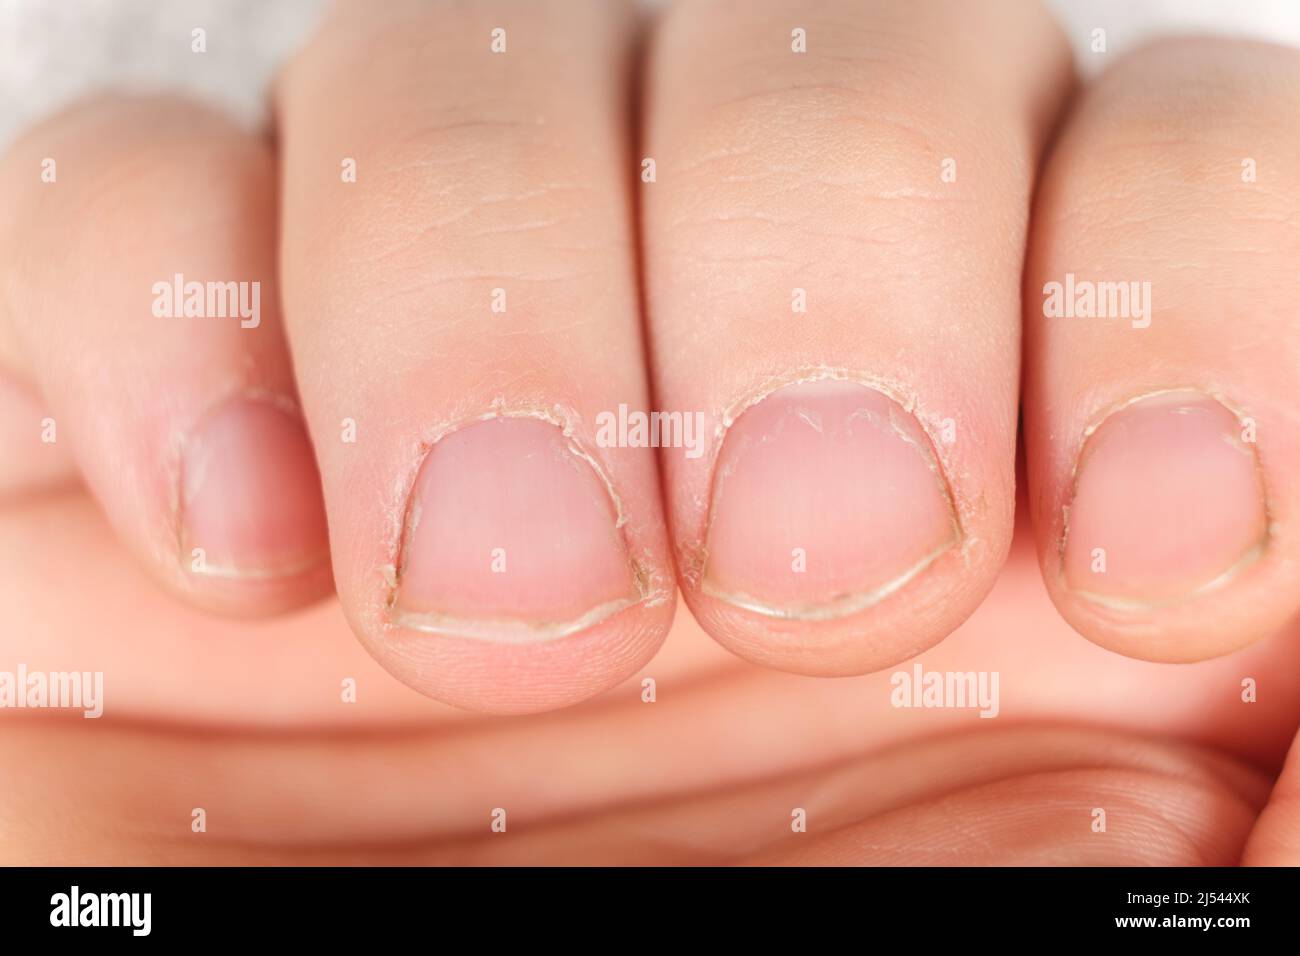 Unkempt male nails with a regrown cuticle on a white background Stock Photo